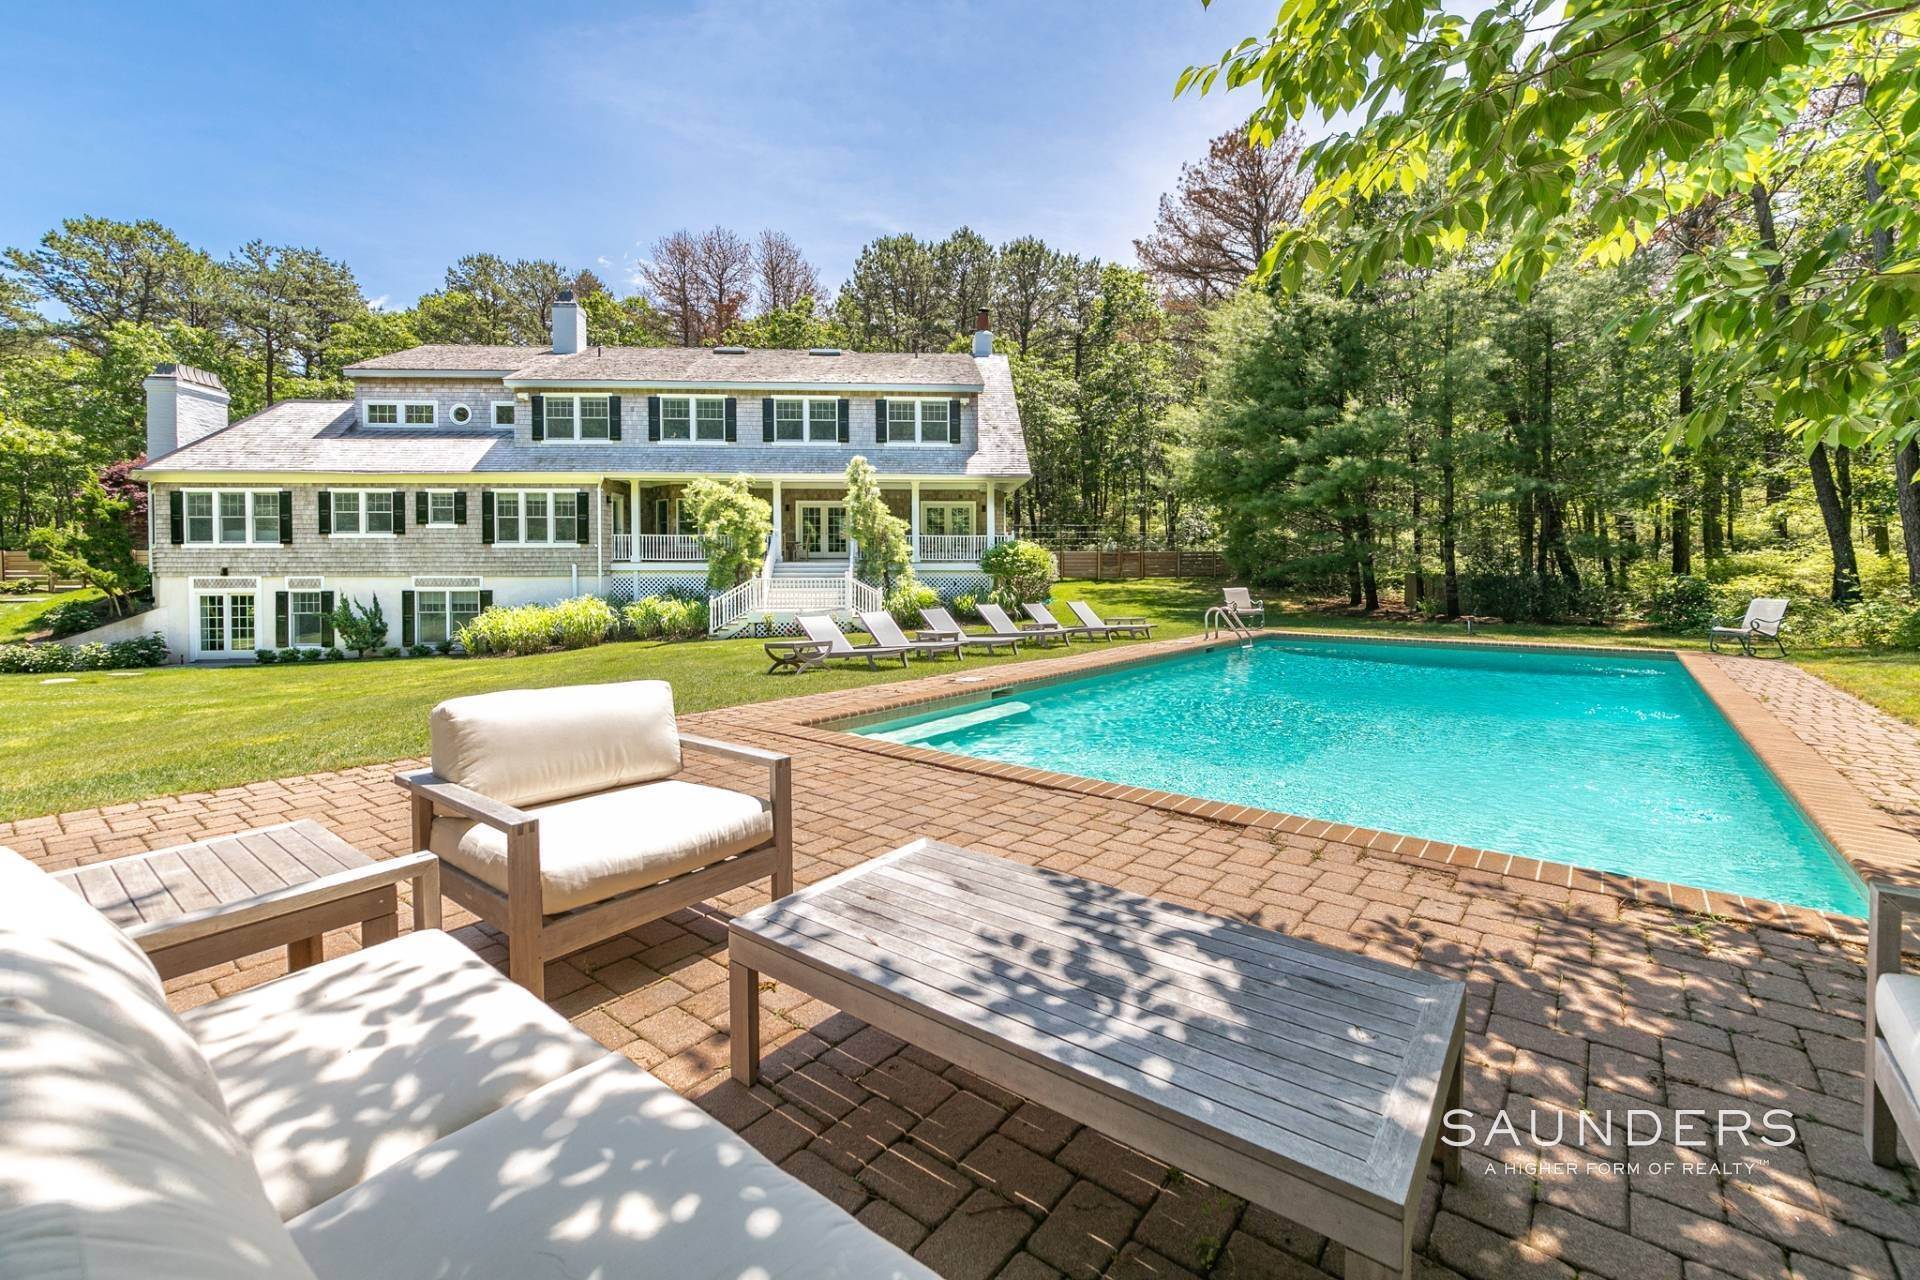 Single Family Homes at Super-Private Water Mill Estate With Pool & Tennis On 5.5 Acres 1058 Noyac Path, Water Mill, NY 11976